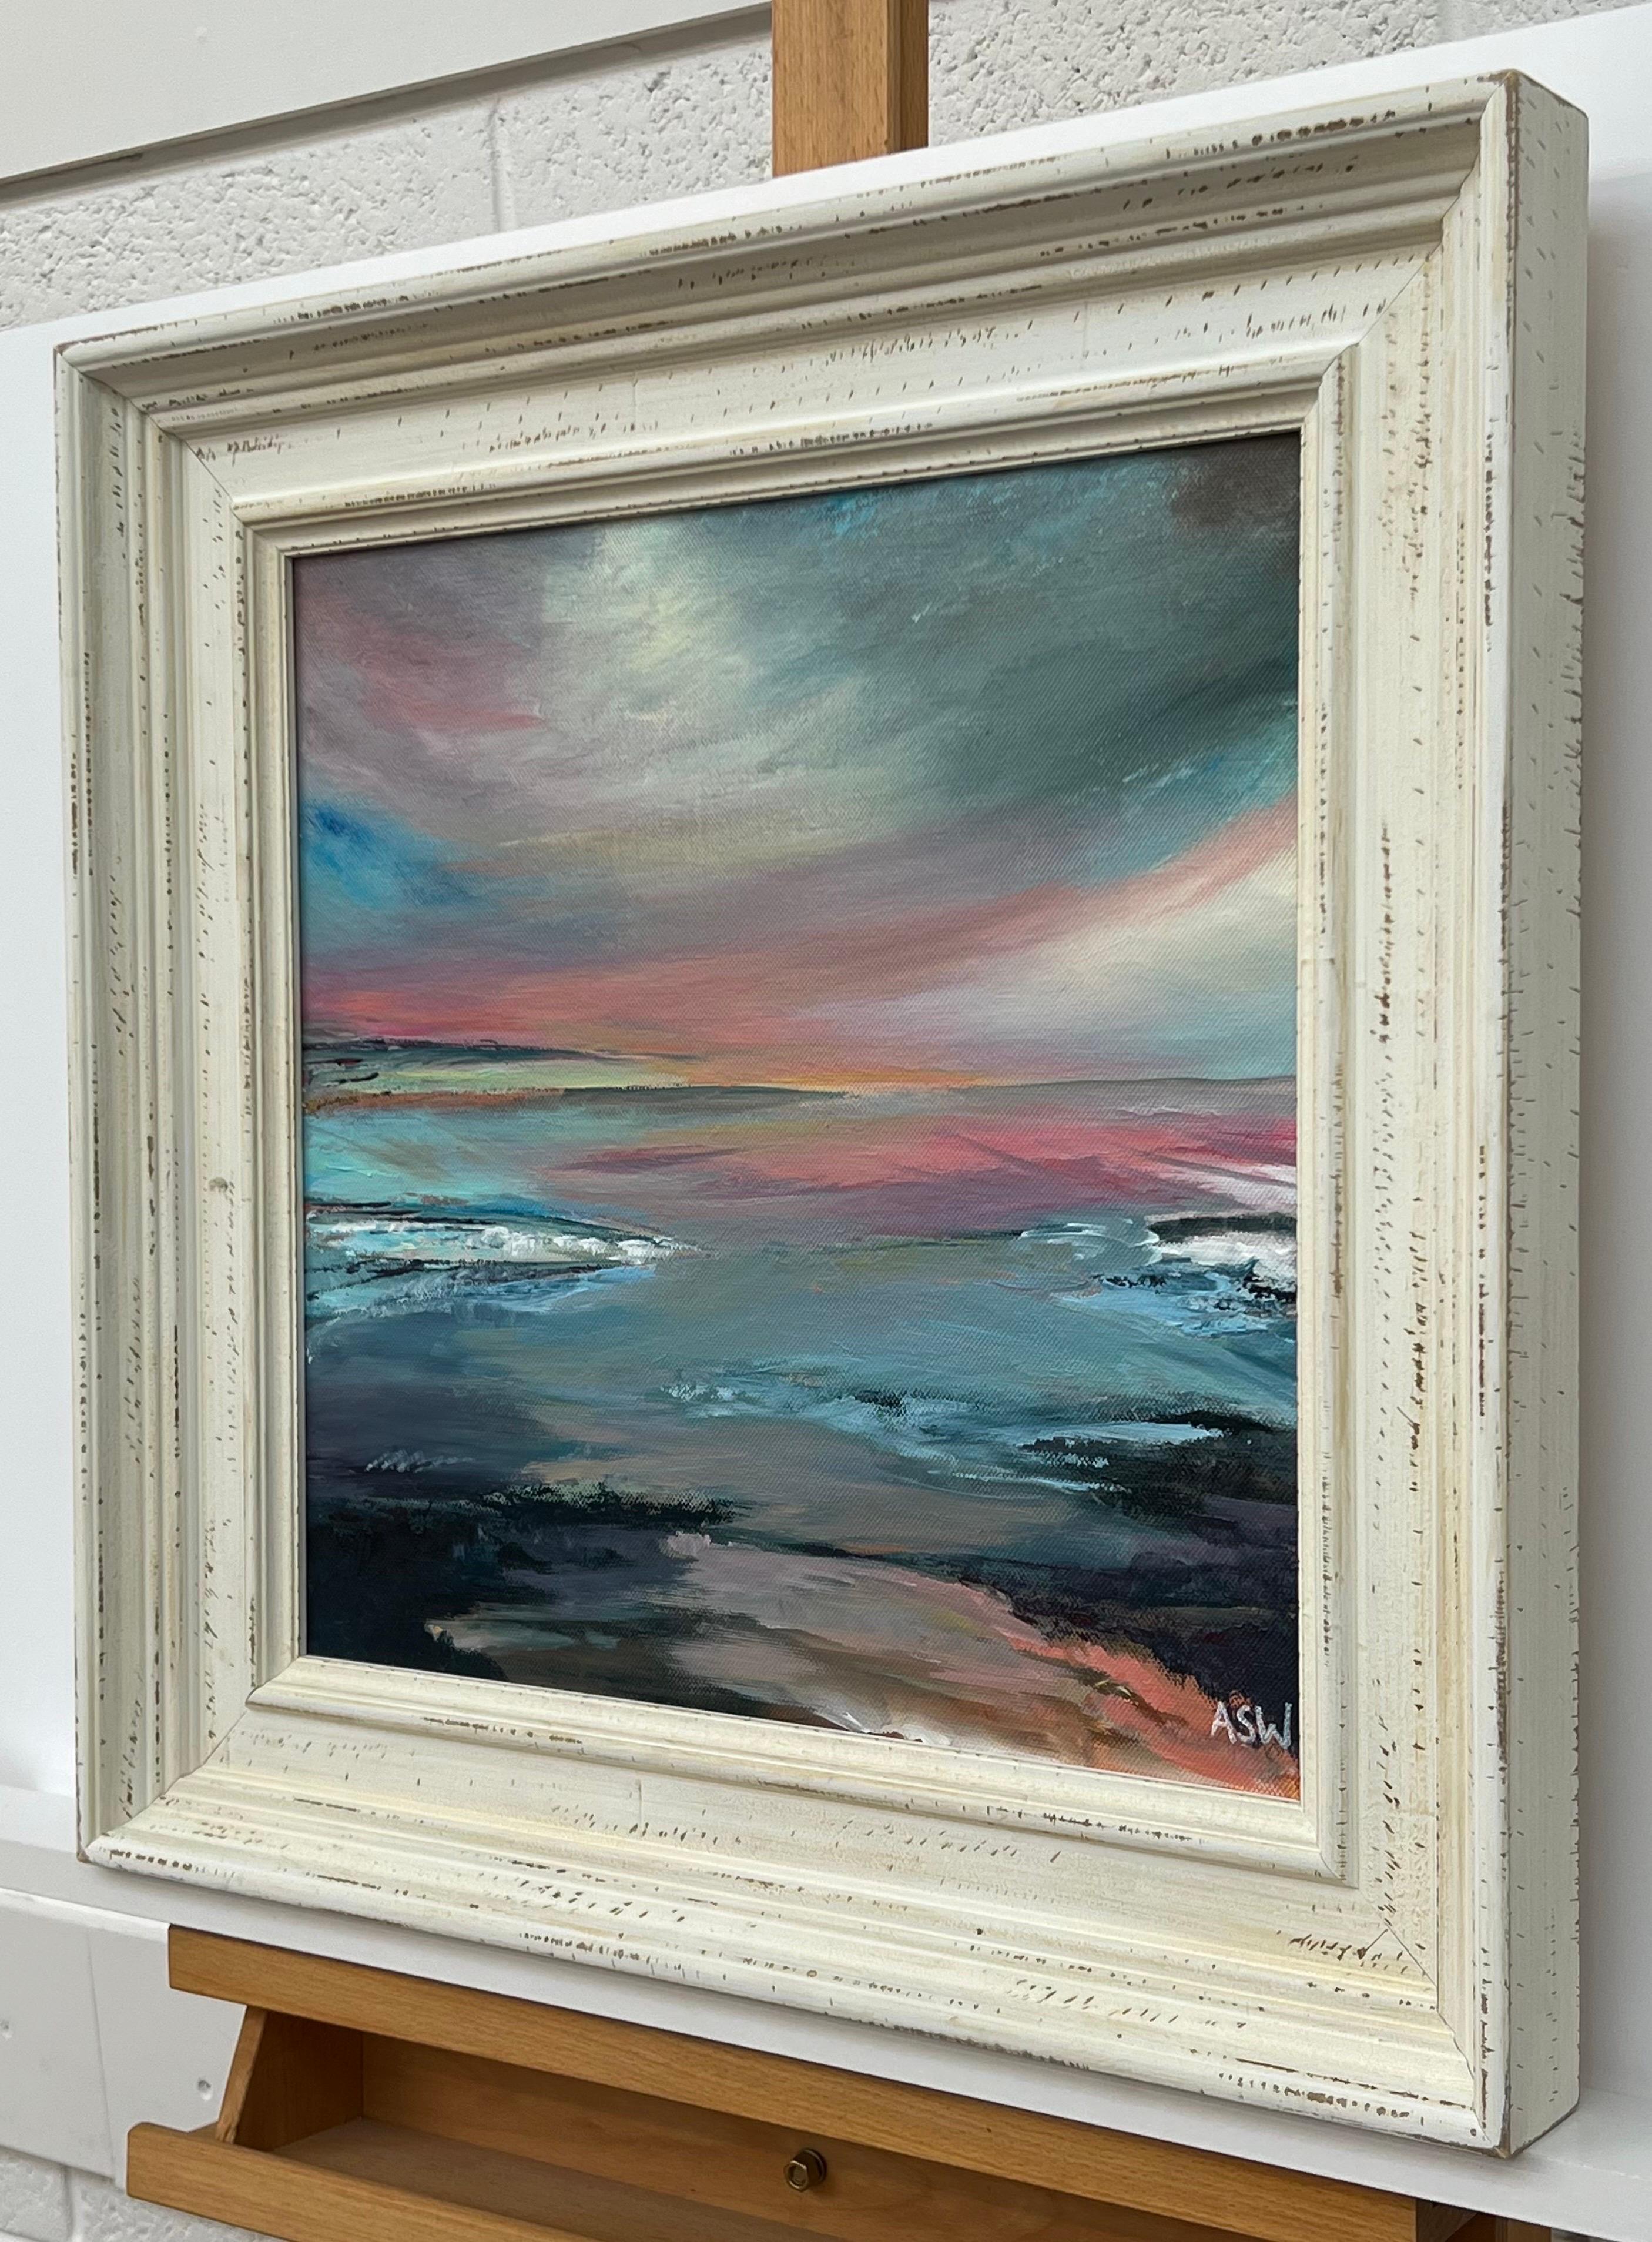 Atmospheric Pink & Blue Seascape Landscape with Dramatic Sky by leading Contemporary British Artist, Angela Wakefield 

Art measures 12 x 12 inches 
Frame measures 17 x 17 inches 

Angela Wakefield has twice been on the front cover of ‘Art of